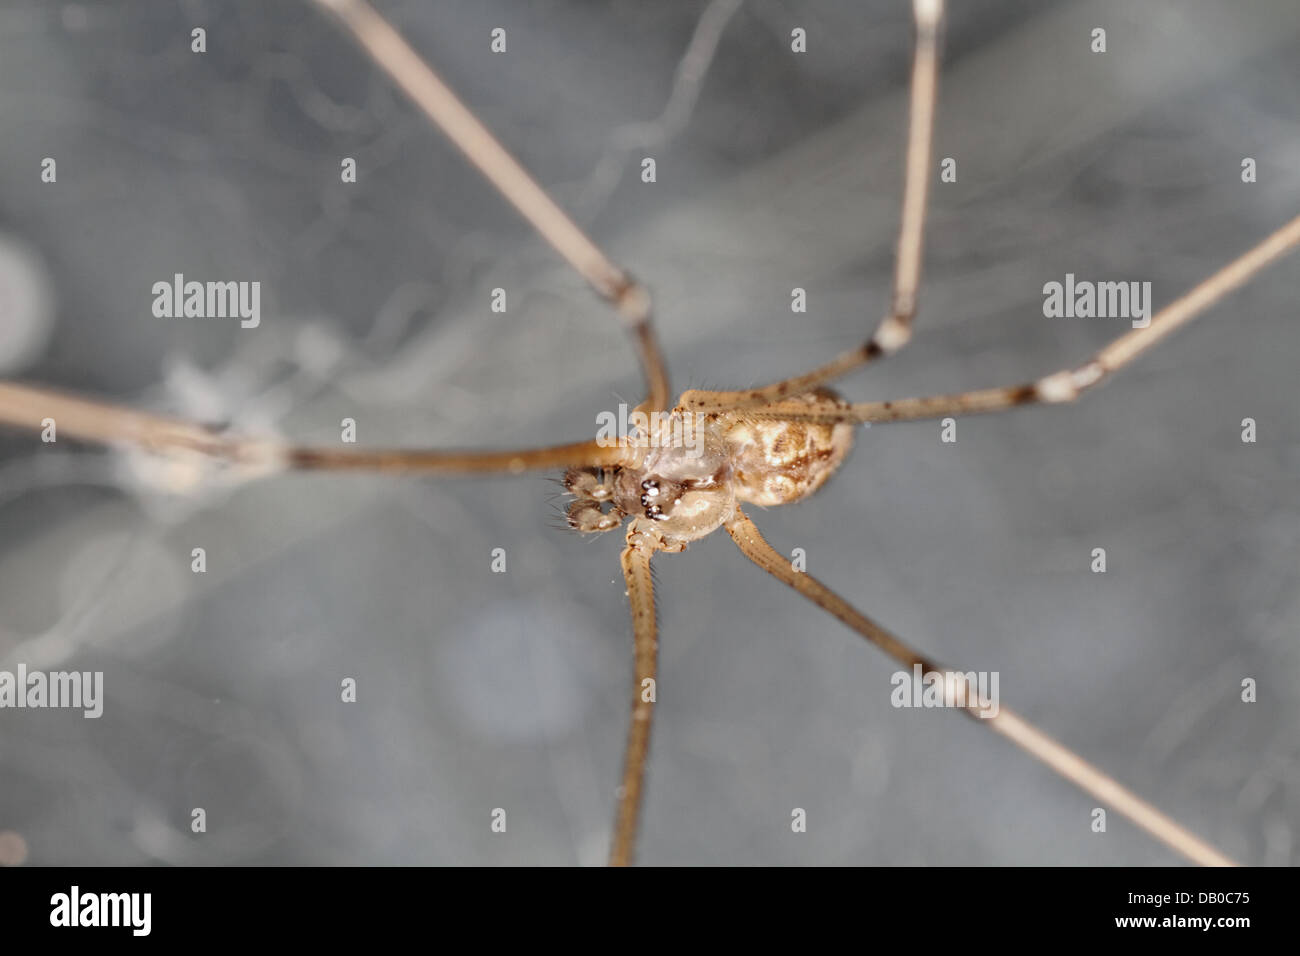 Pholcus phalangioides spider, Spain. Stock Photo